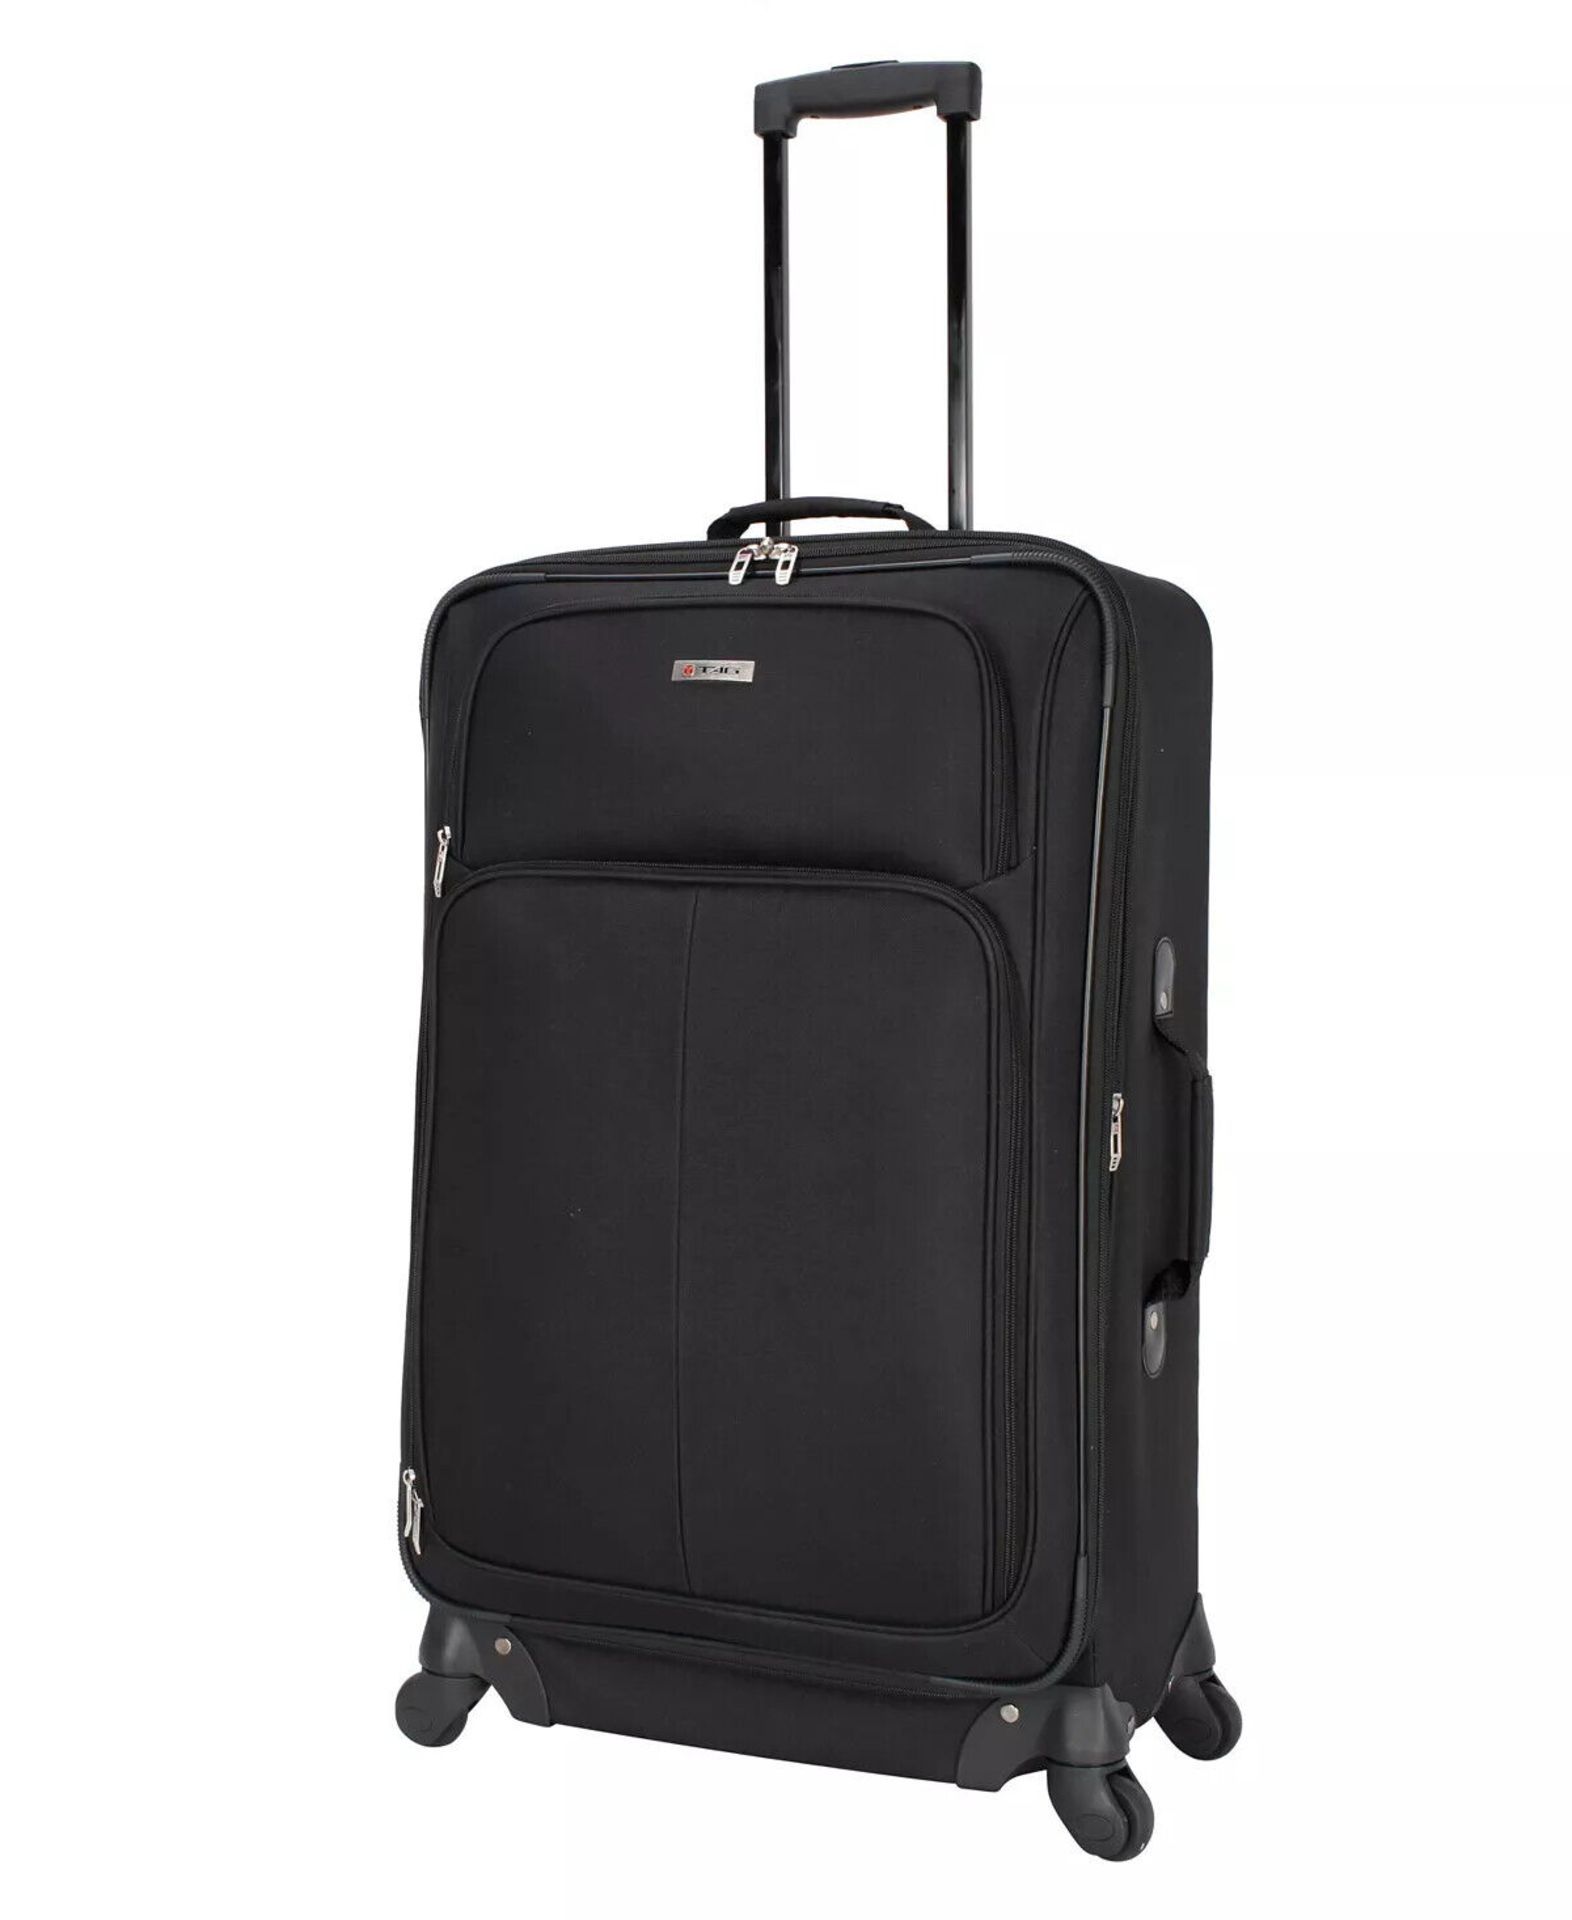 New Set OF TAG Ridgefield Black 5 Piece Softside Luggage Set. RRP $300 R5.7. This classic set from - Image 2 of 5